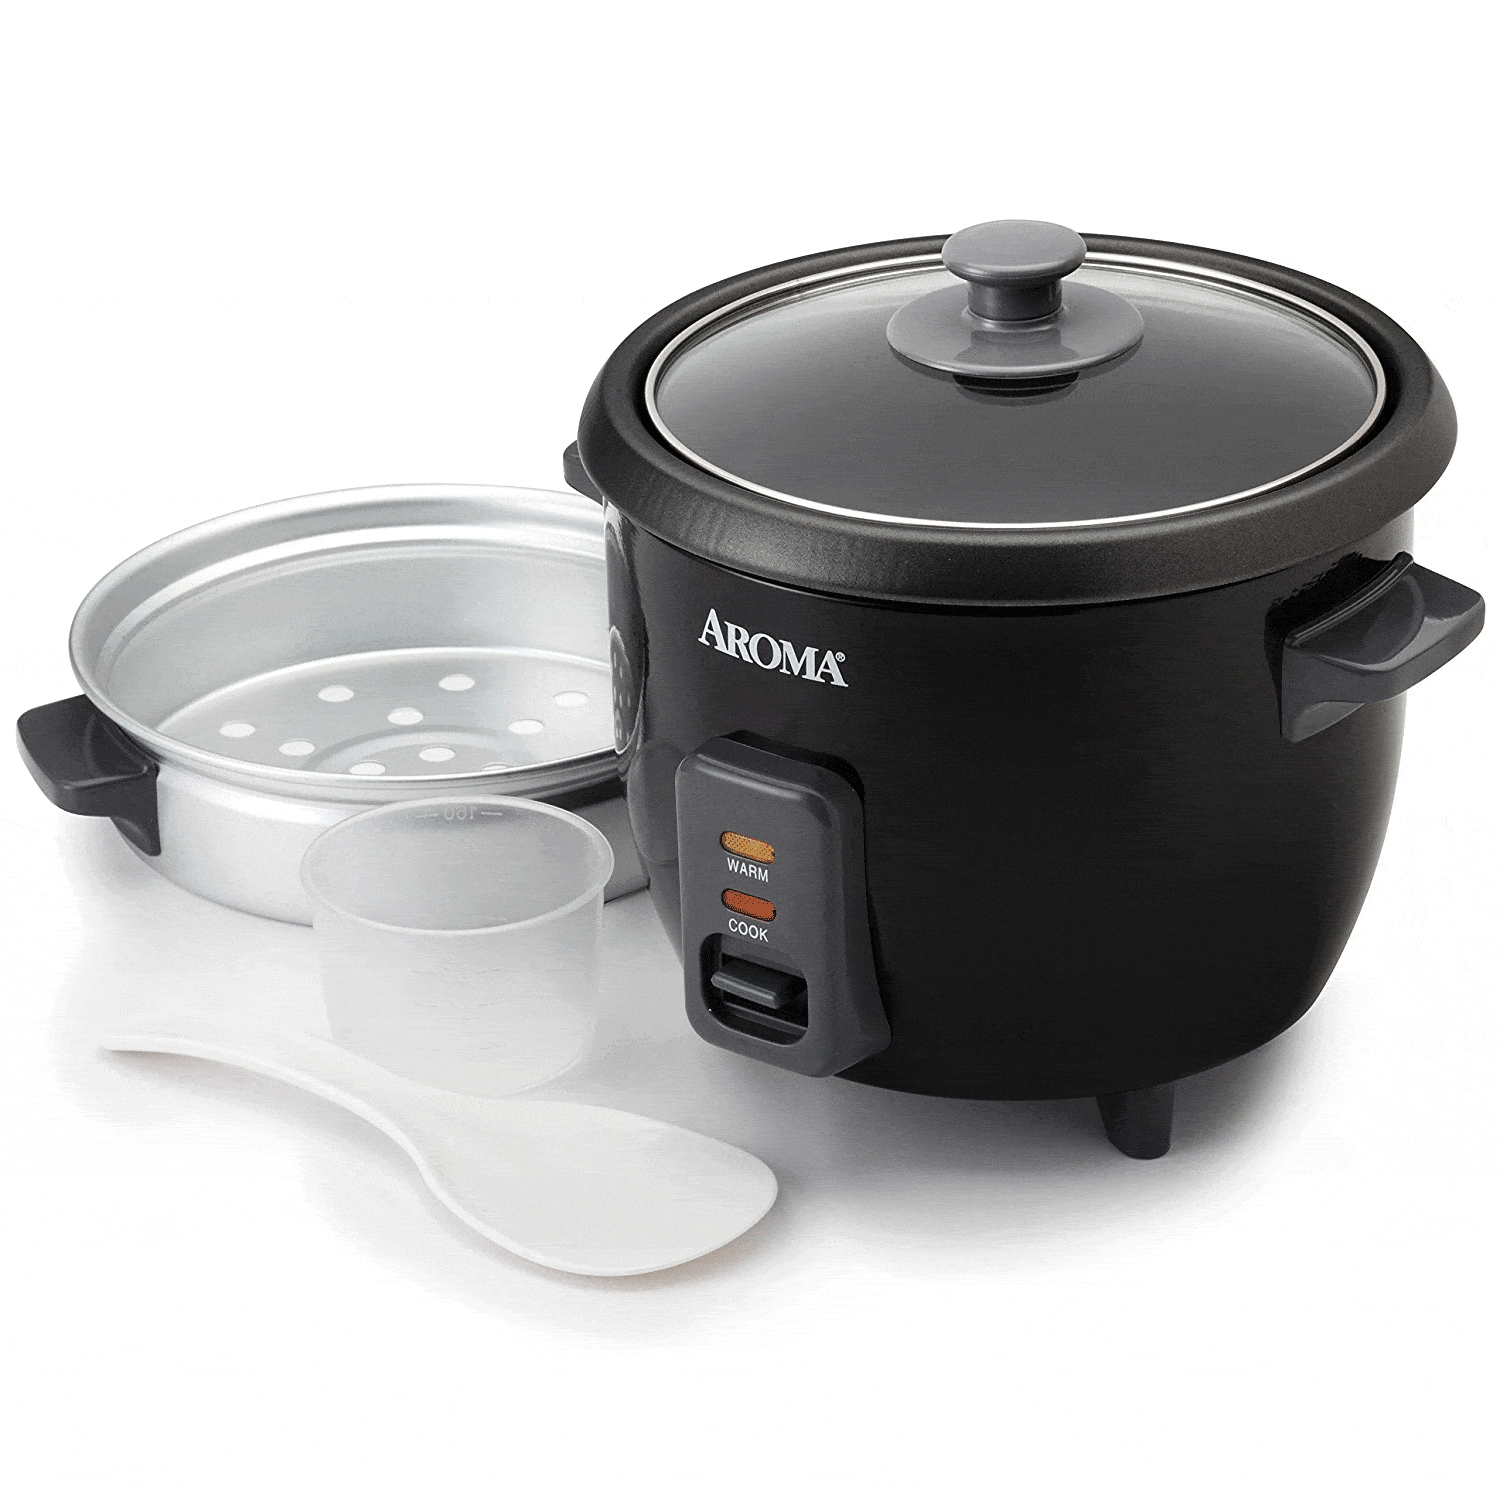 aroma-3-cup-rice-cooker-review